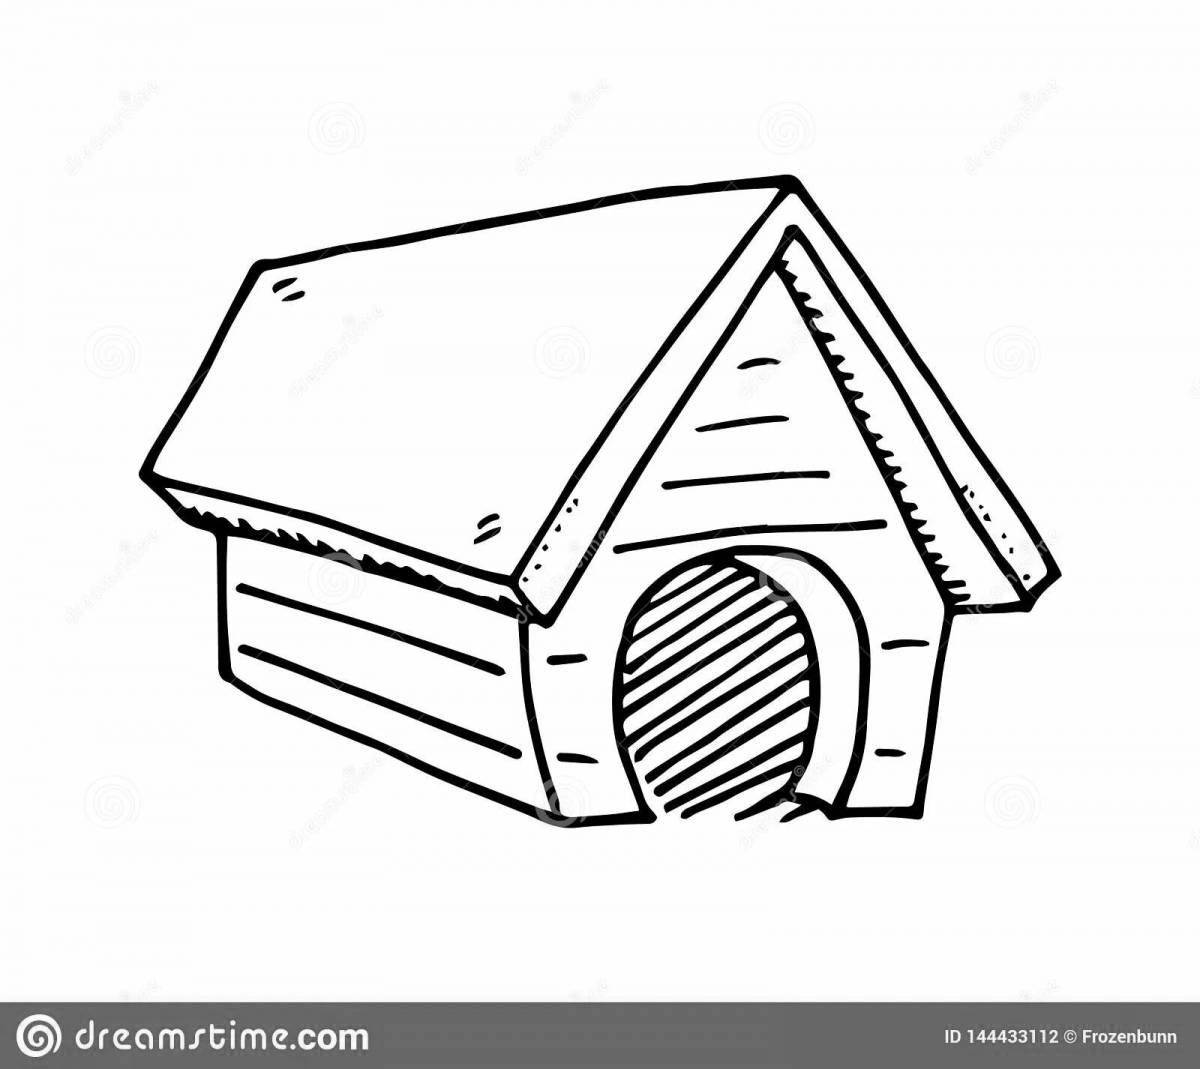 Coloring page happy dog ​​house